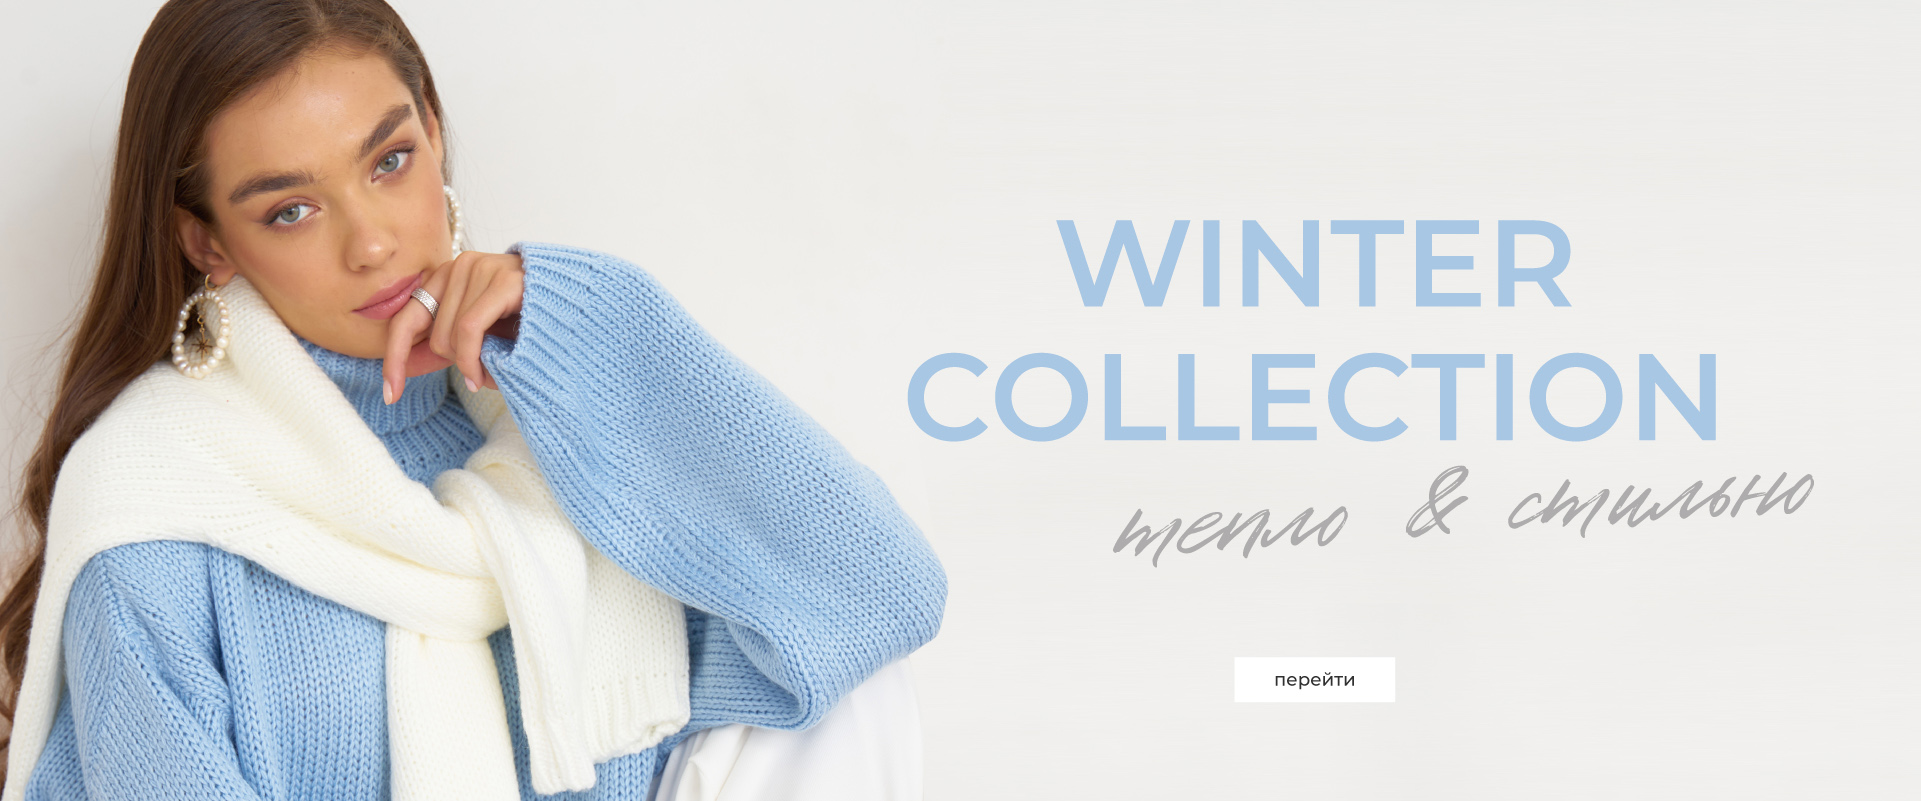 winter collection with a benefit - 20%